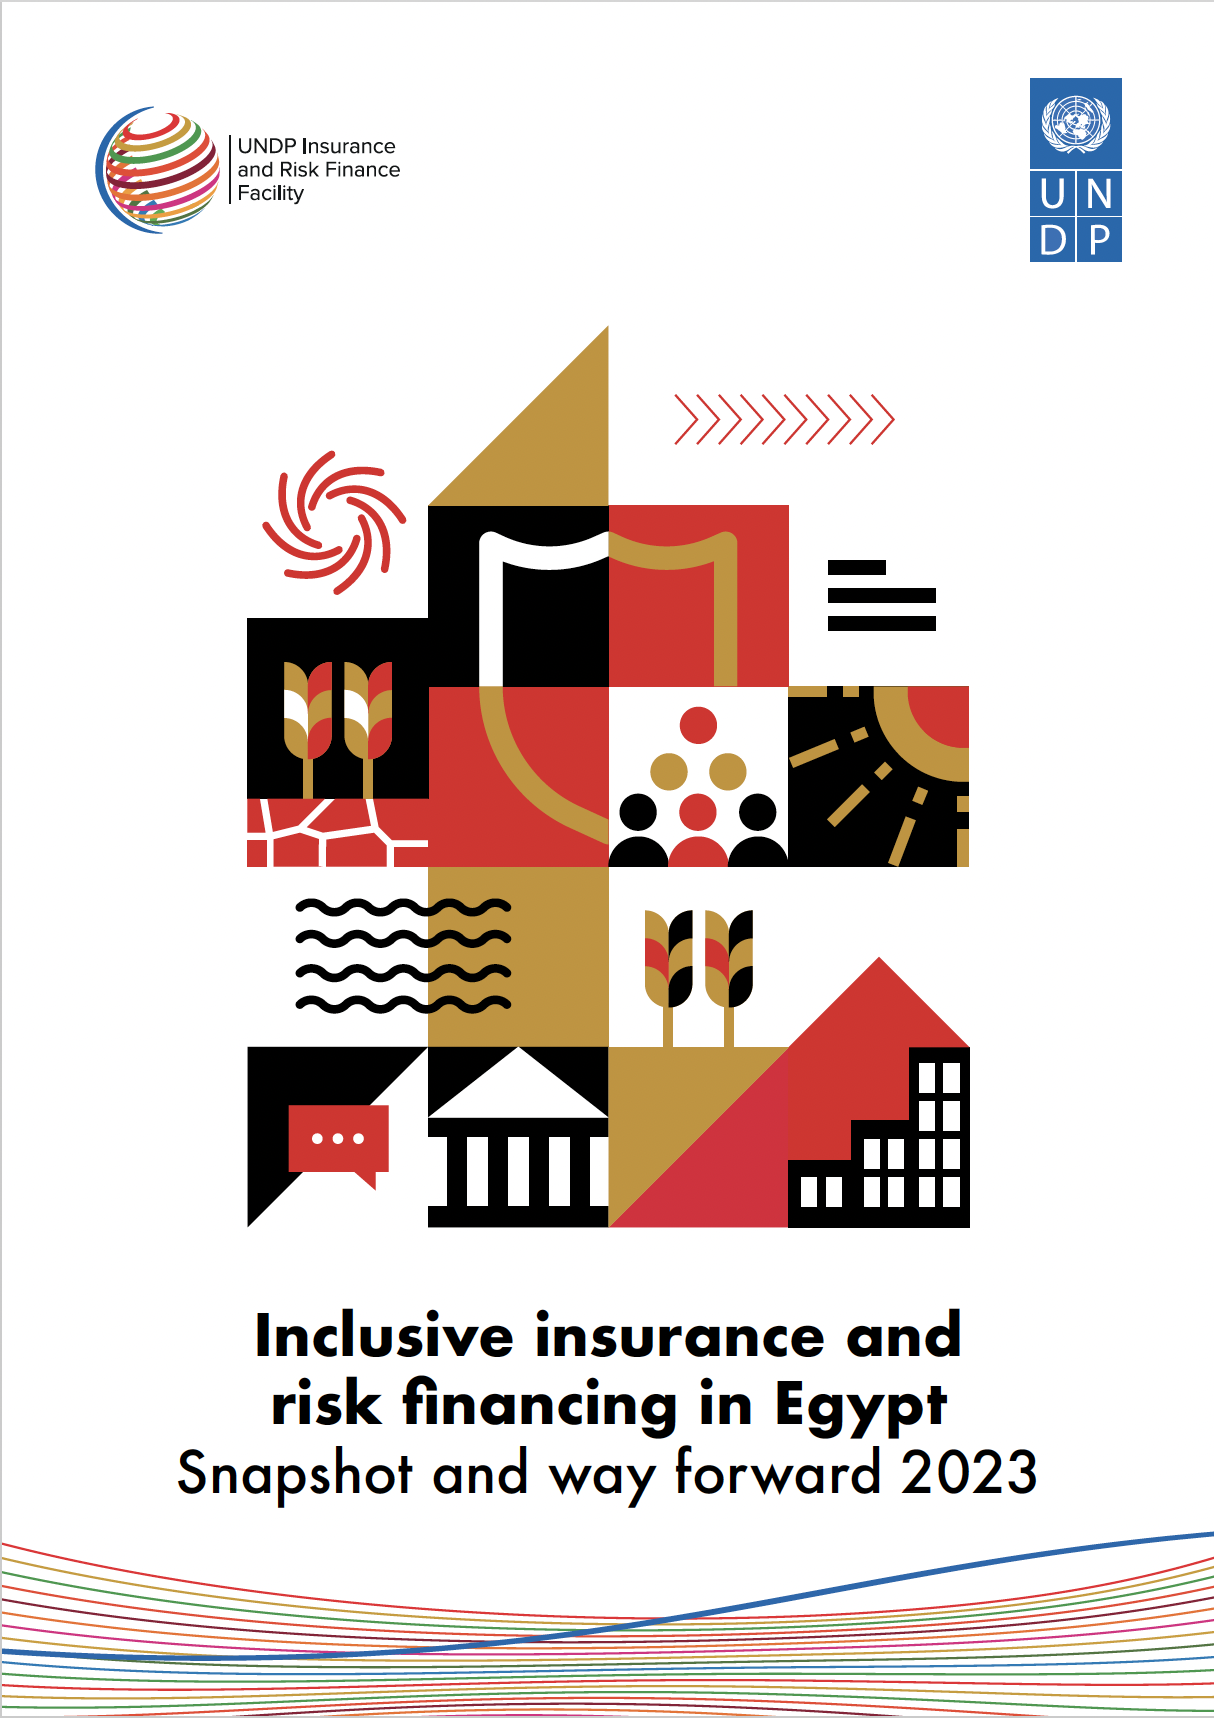 Inclusive insurance and risk financing in Egypt. Snapshot and way forward 2023